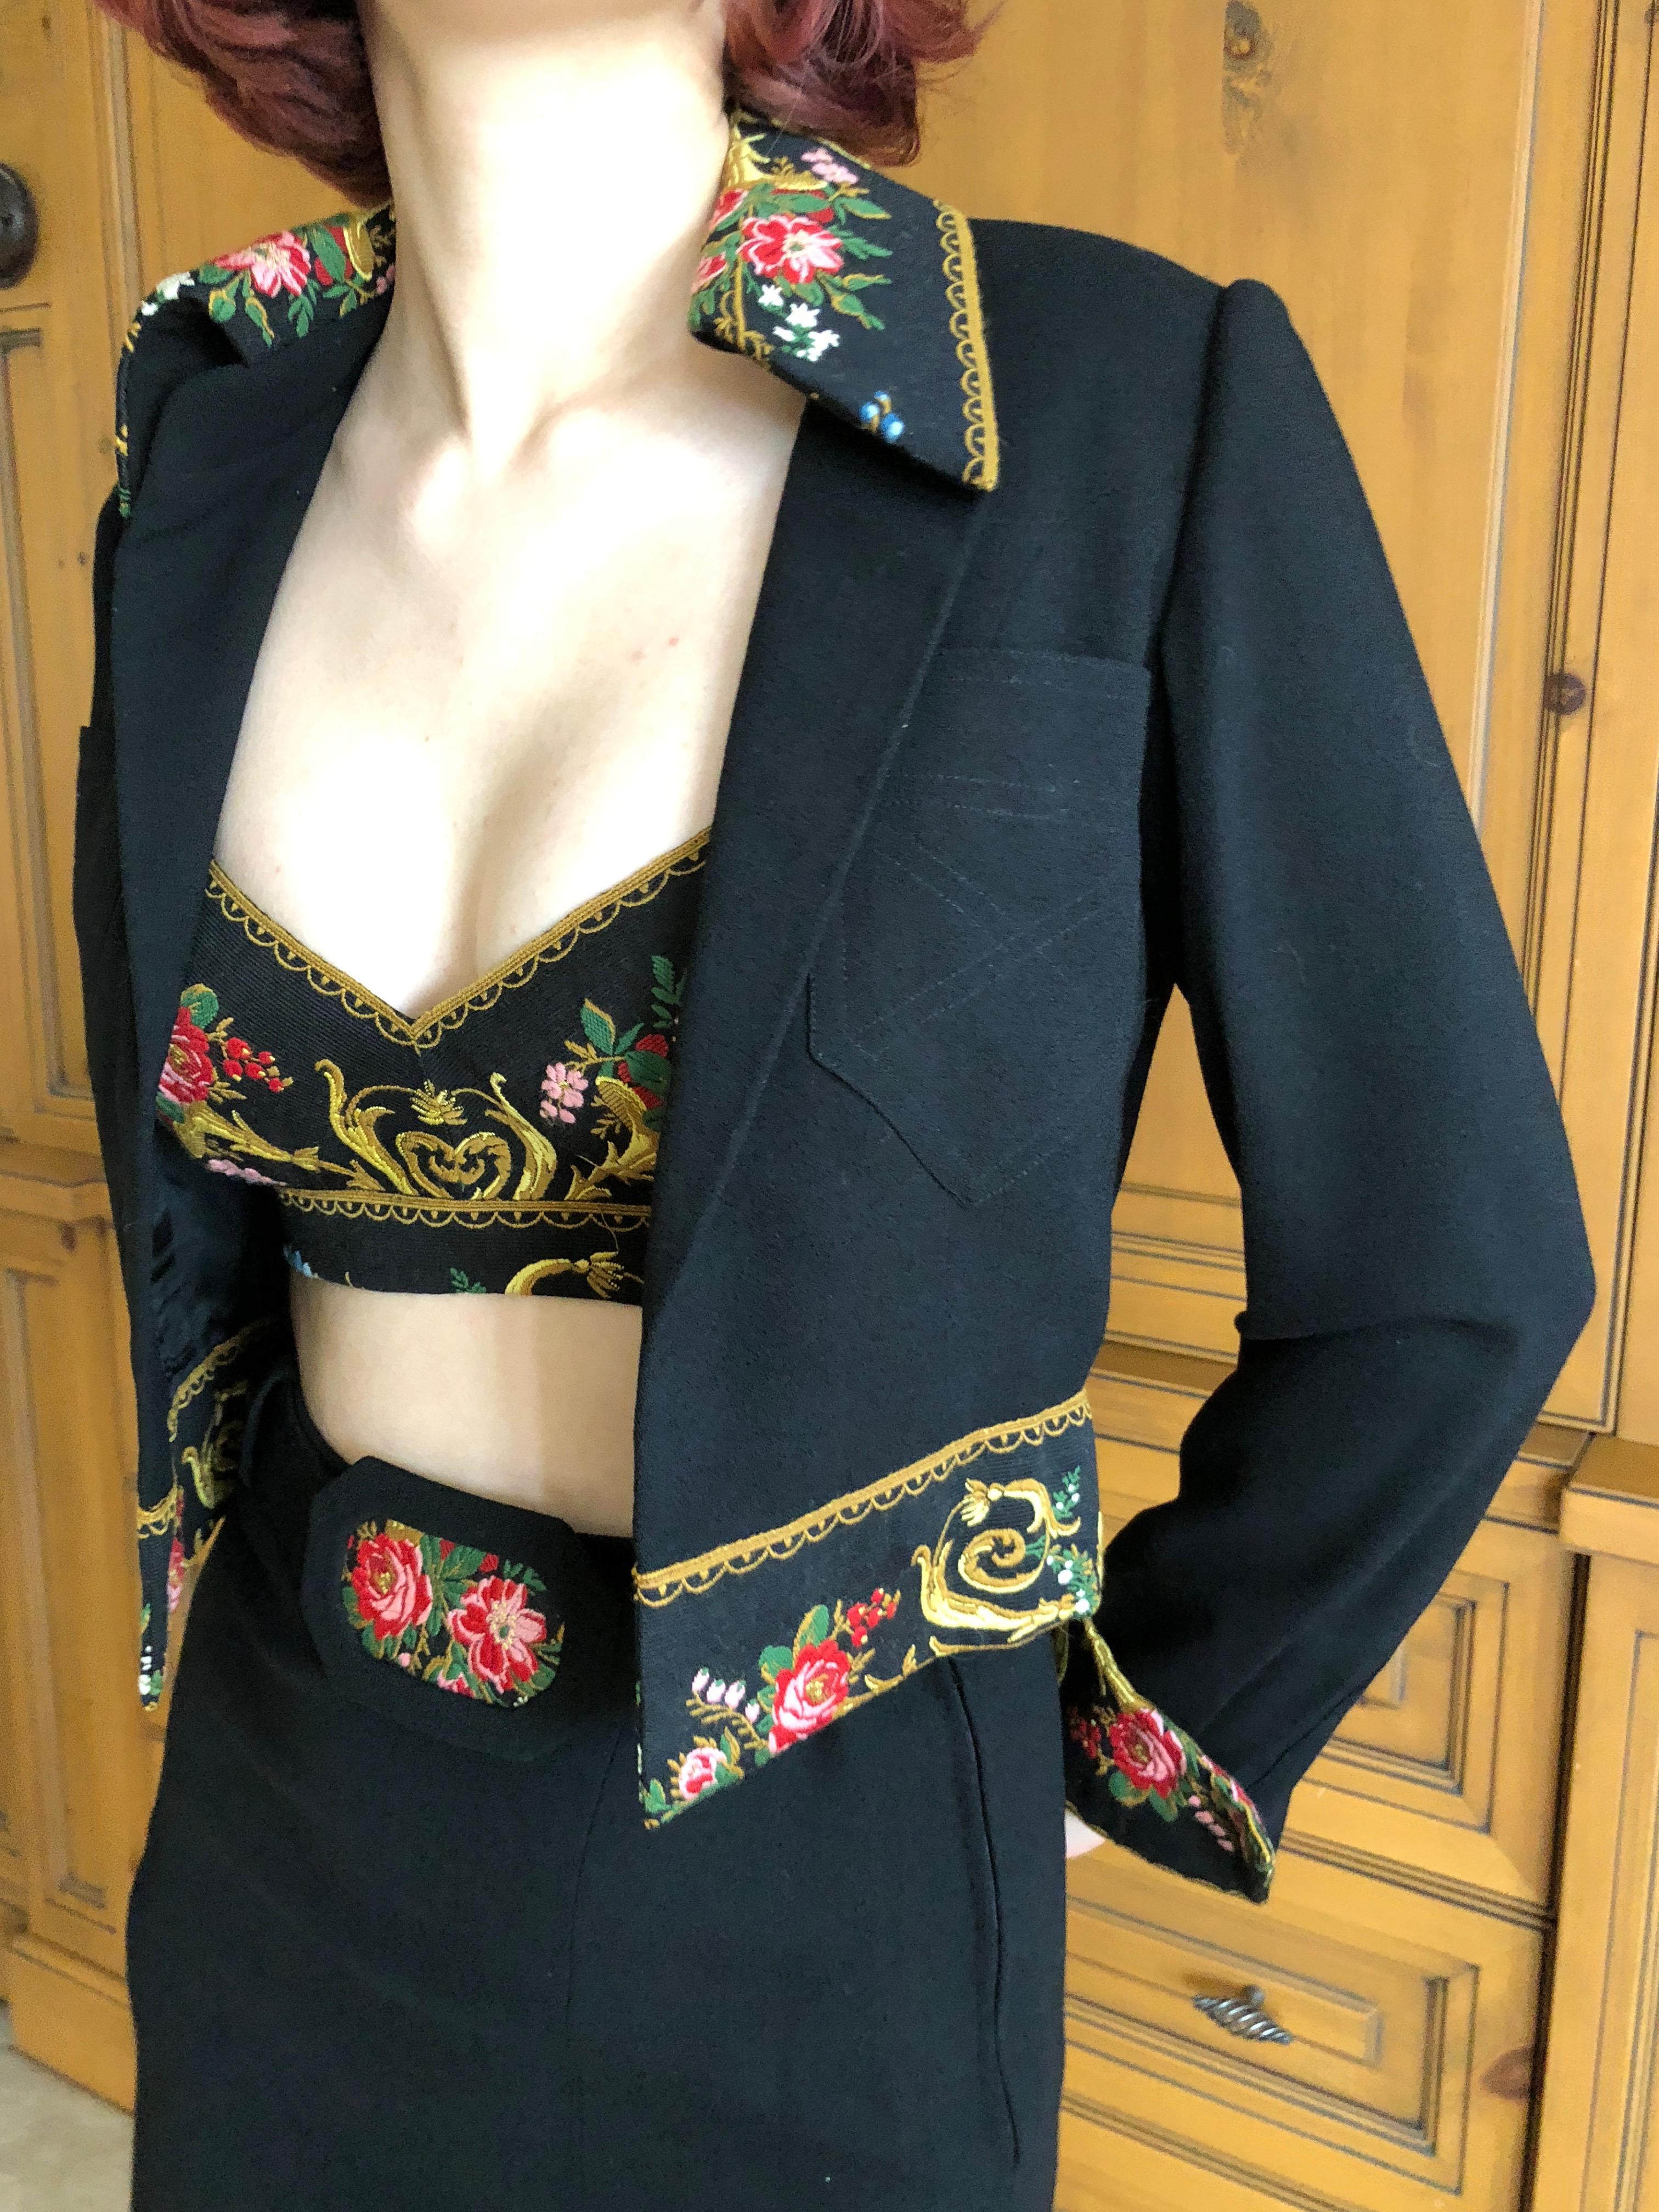 Cardinali Embroidered Black Cotton Skirt Suit with Midriff Baring Bra Fall 1971  For Sale 16